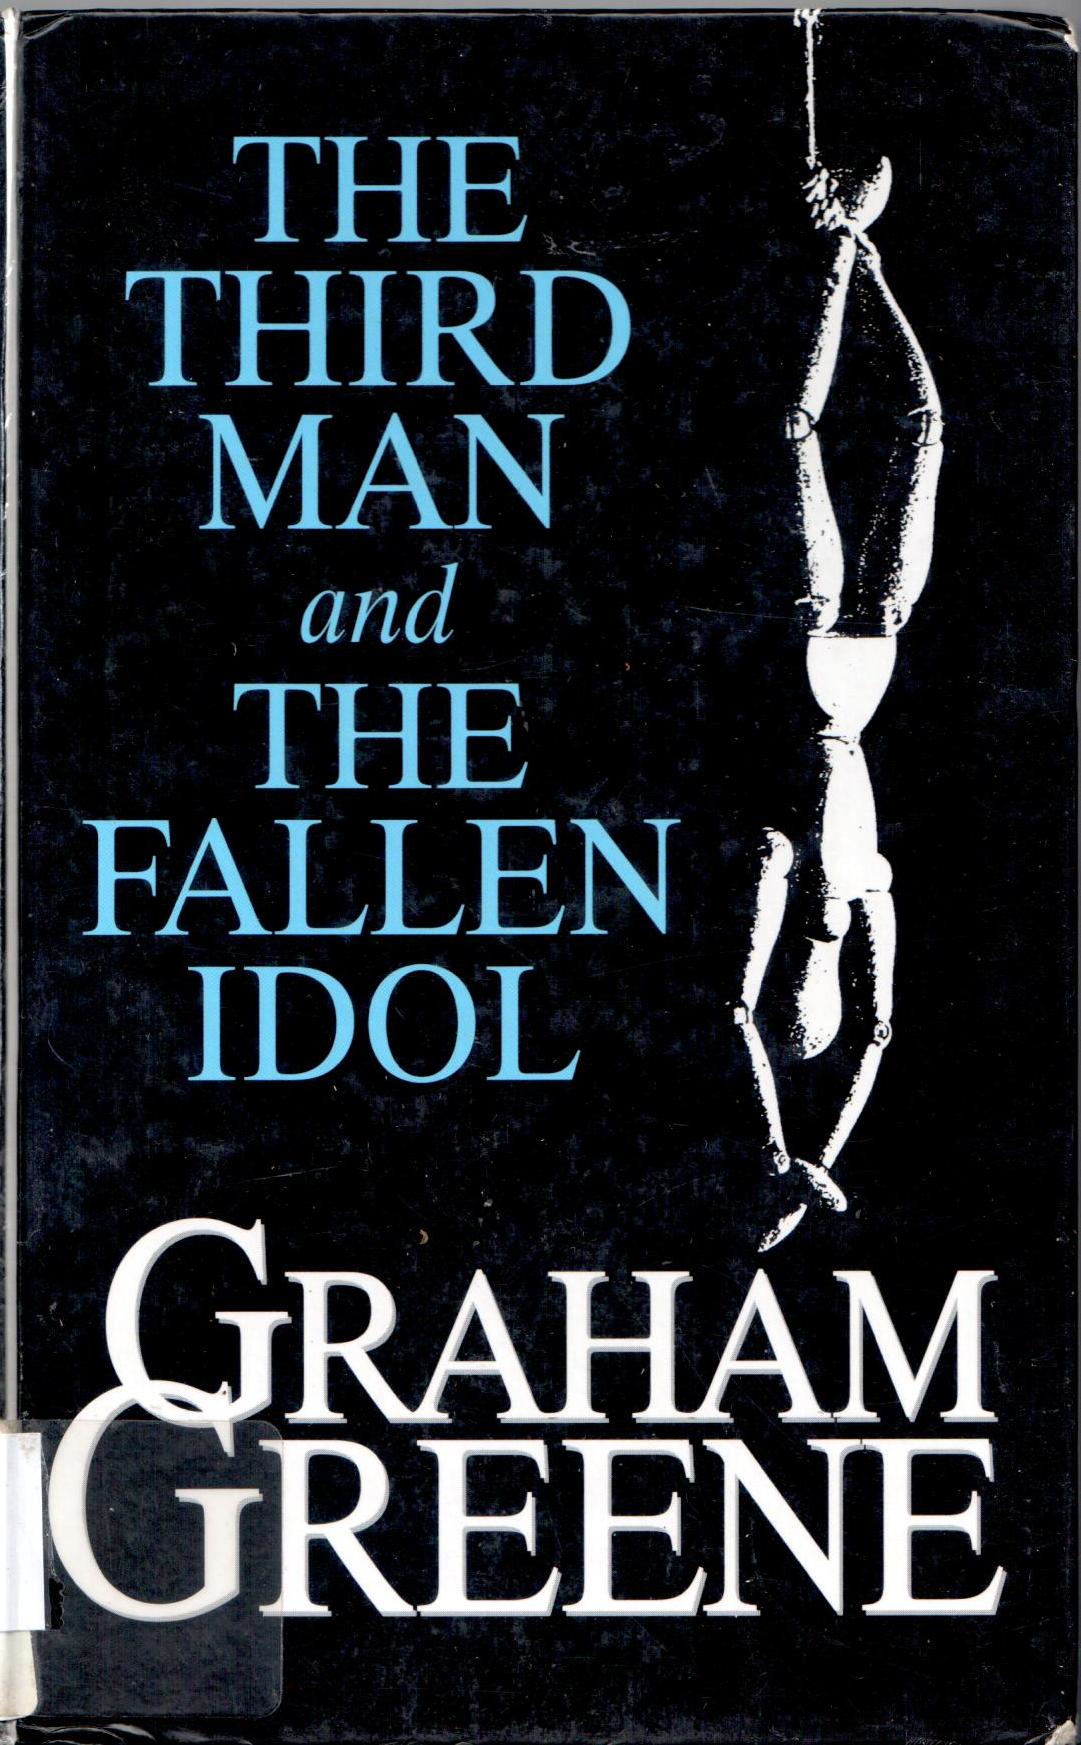 The third man and the fallen idol